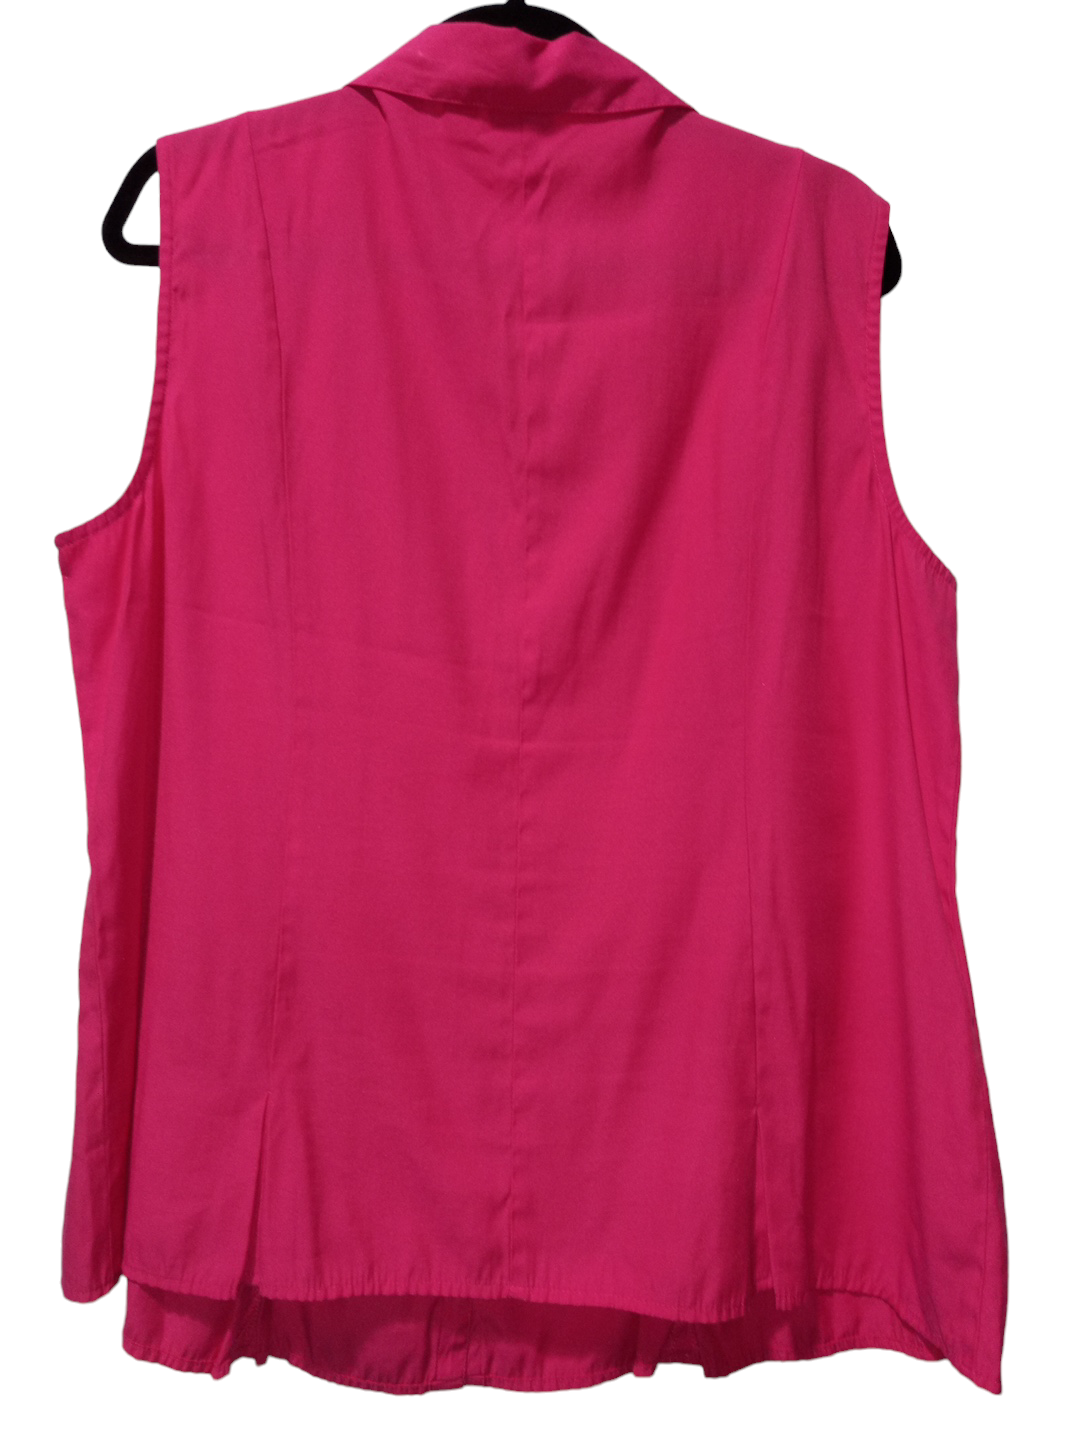 Pink Top Sleeveless Cato, Size 2x